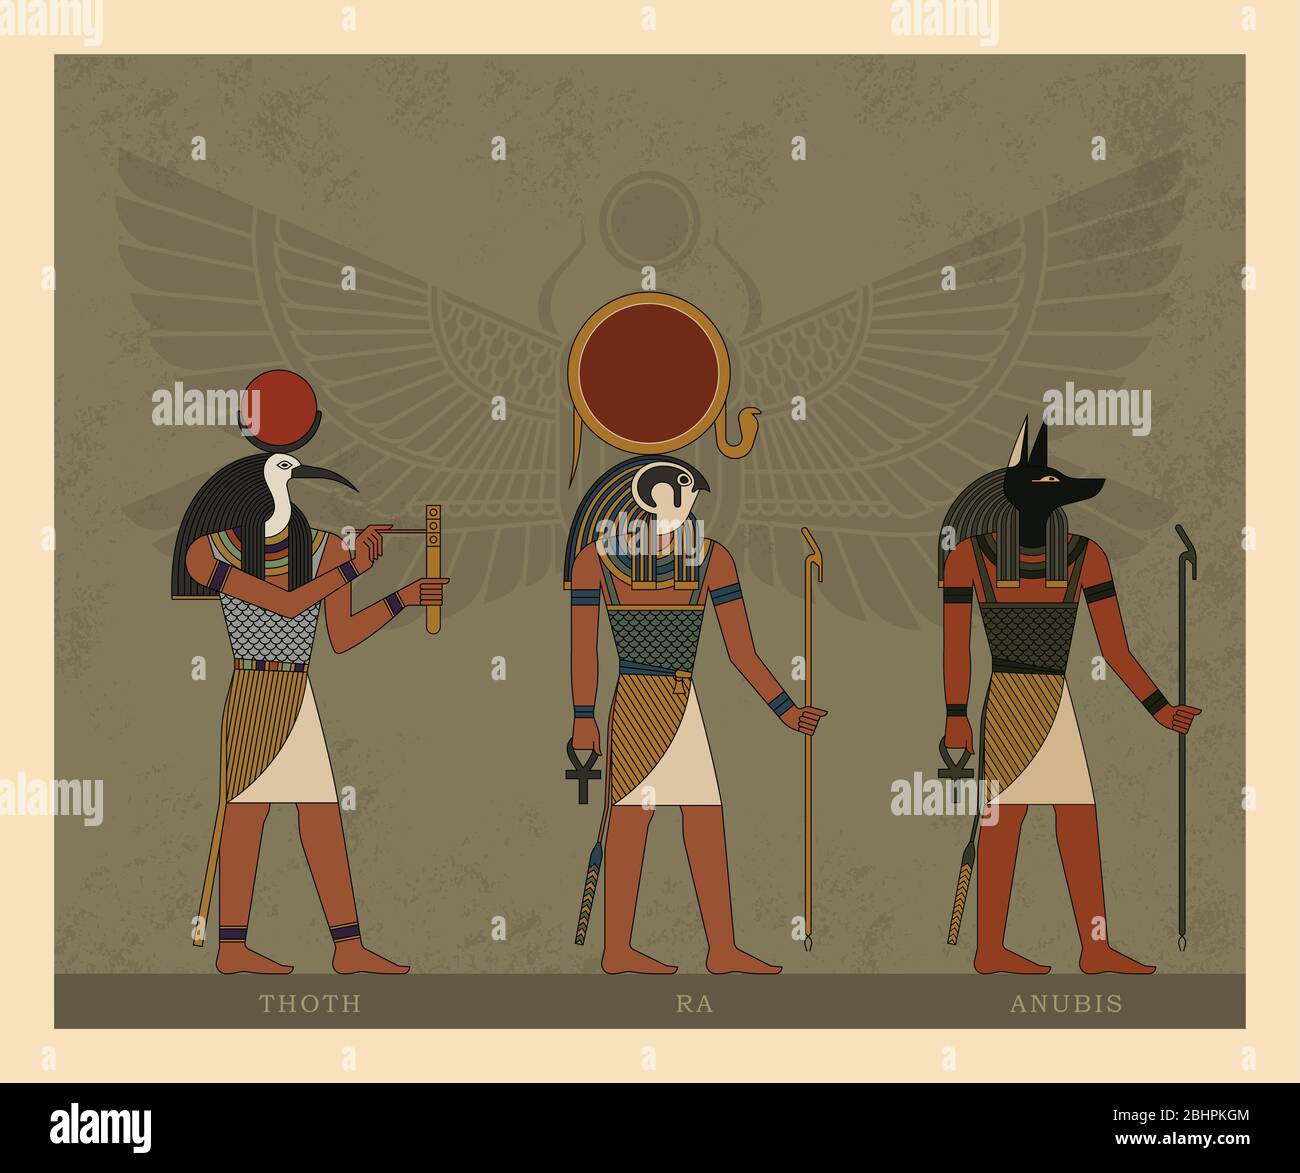 Illustration of the gods and symbols of ancient Egypt isolated against the background of the scarab beetle. Stock Vector